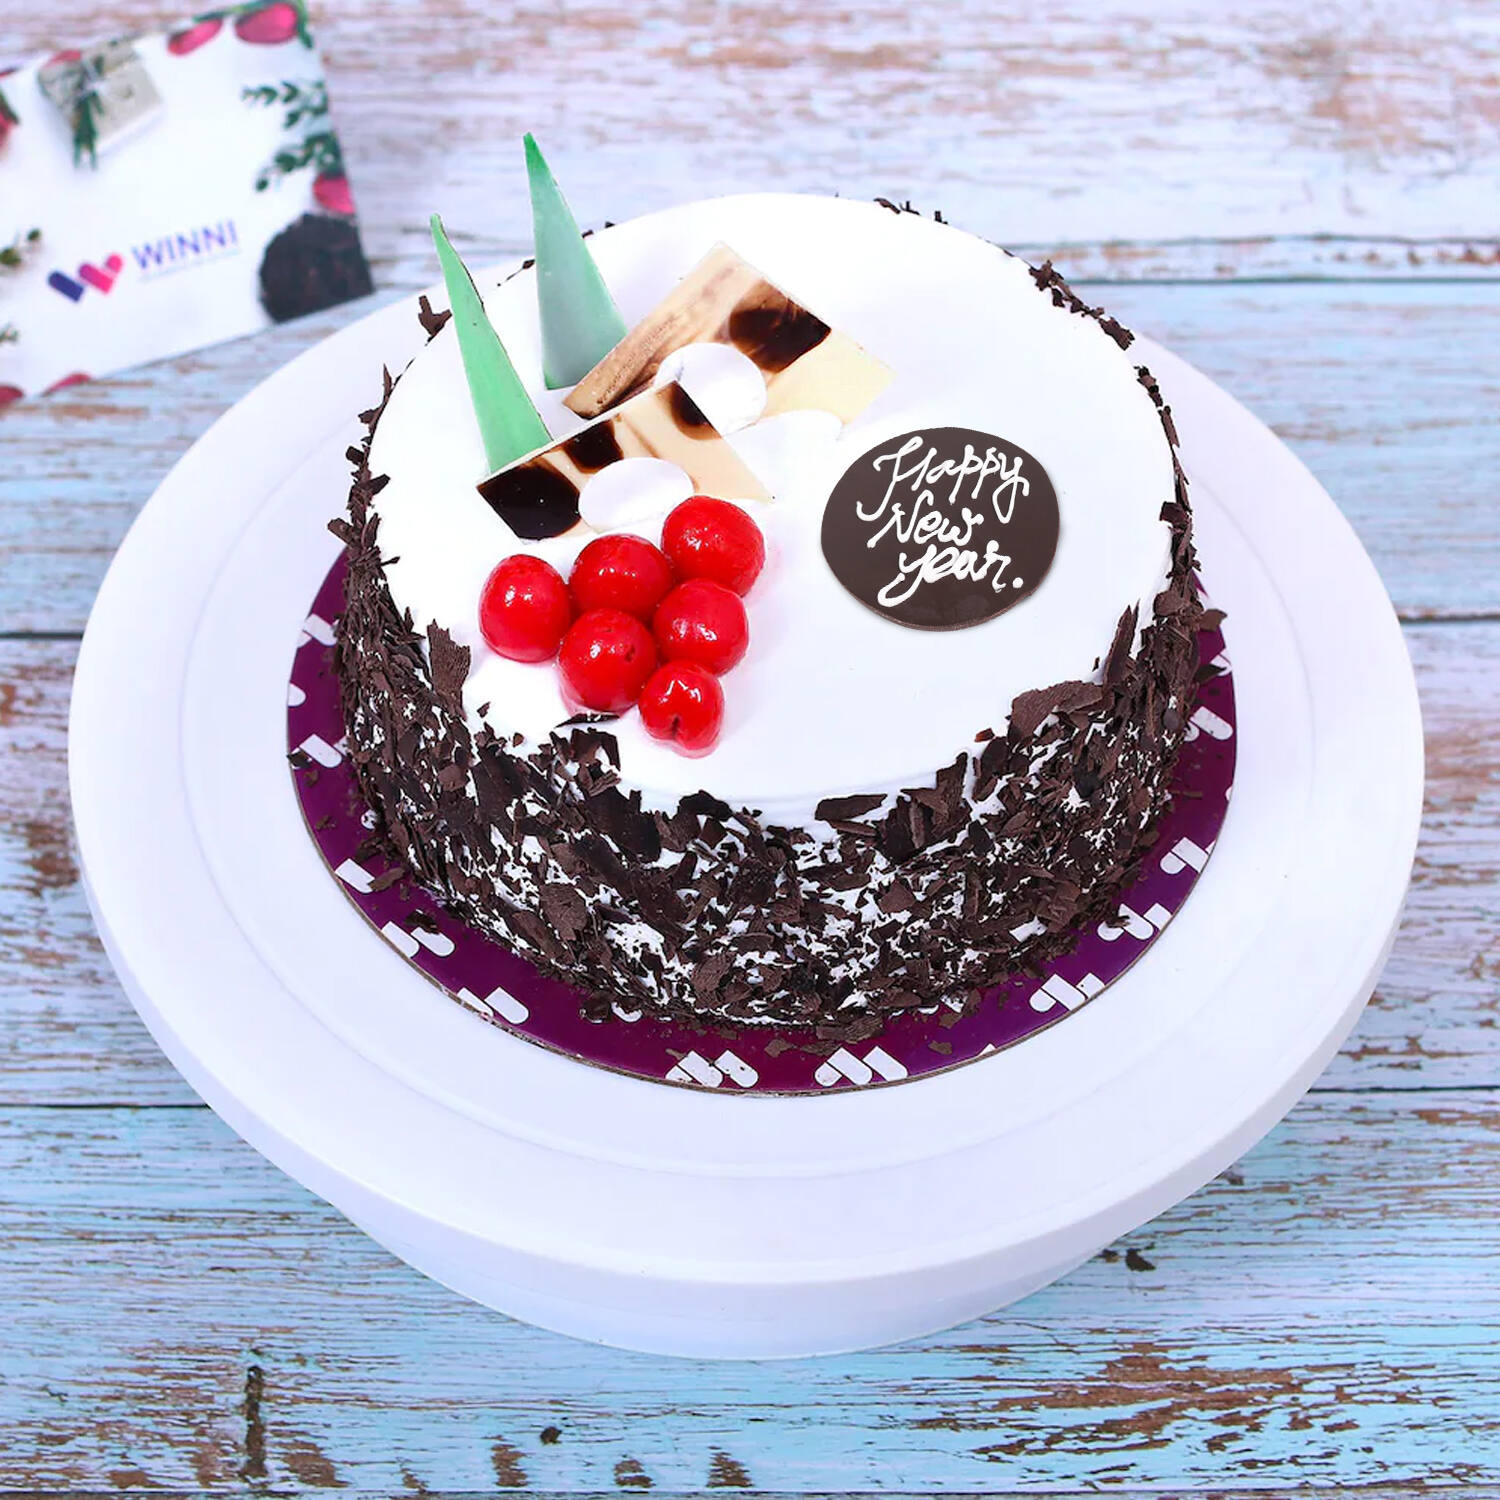 Black Forest Cake - Bakers Talent - Exotic Desserts, Customized Cakes,  Macarons, Cupcakes